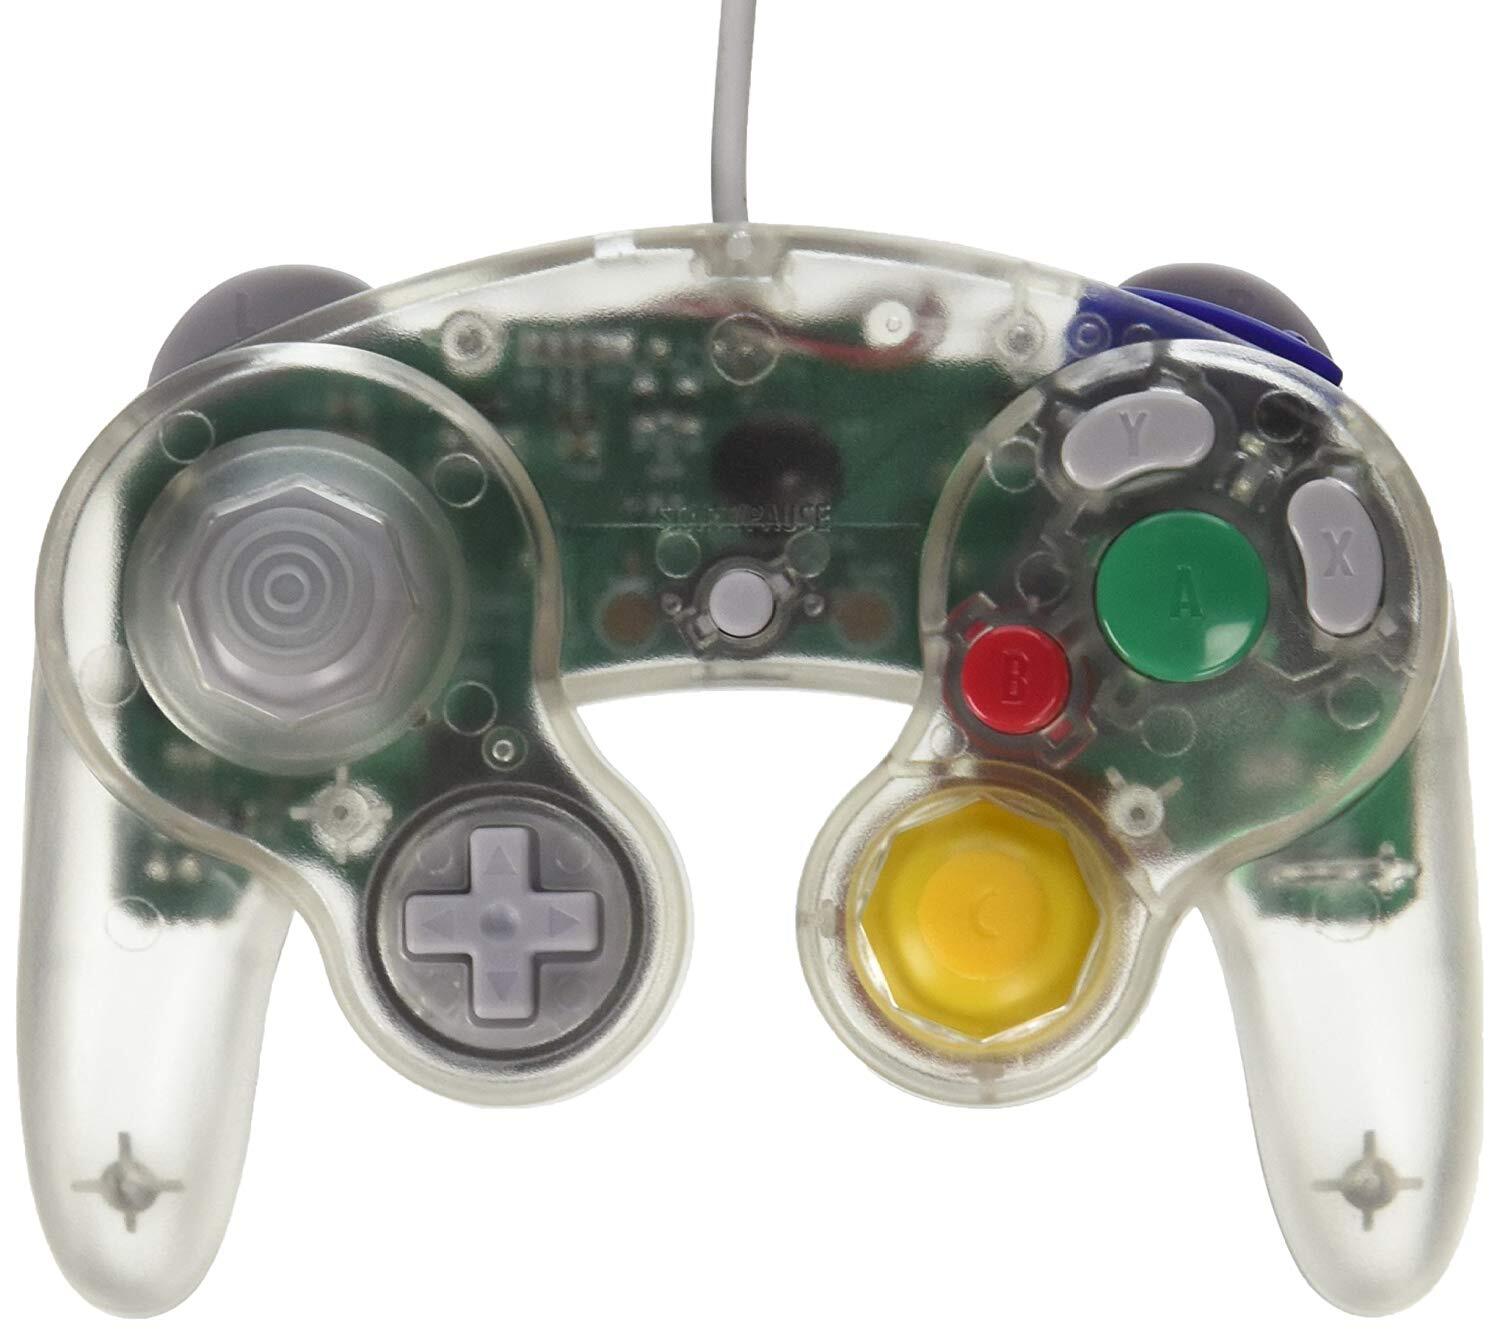 Teknogame Gamecube Controller Clear